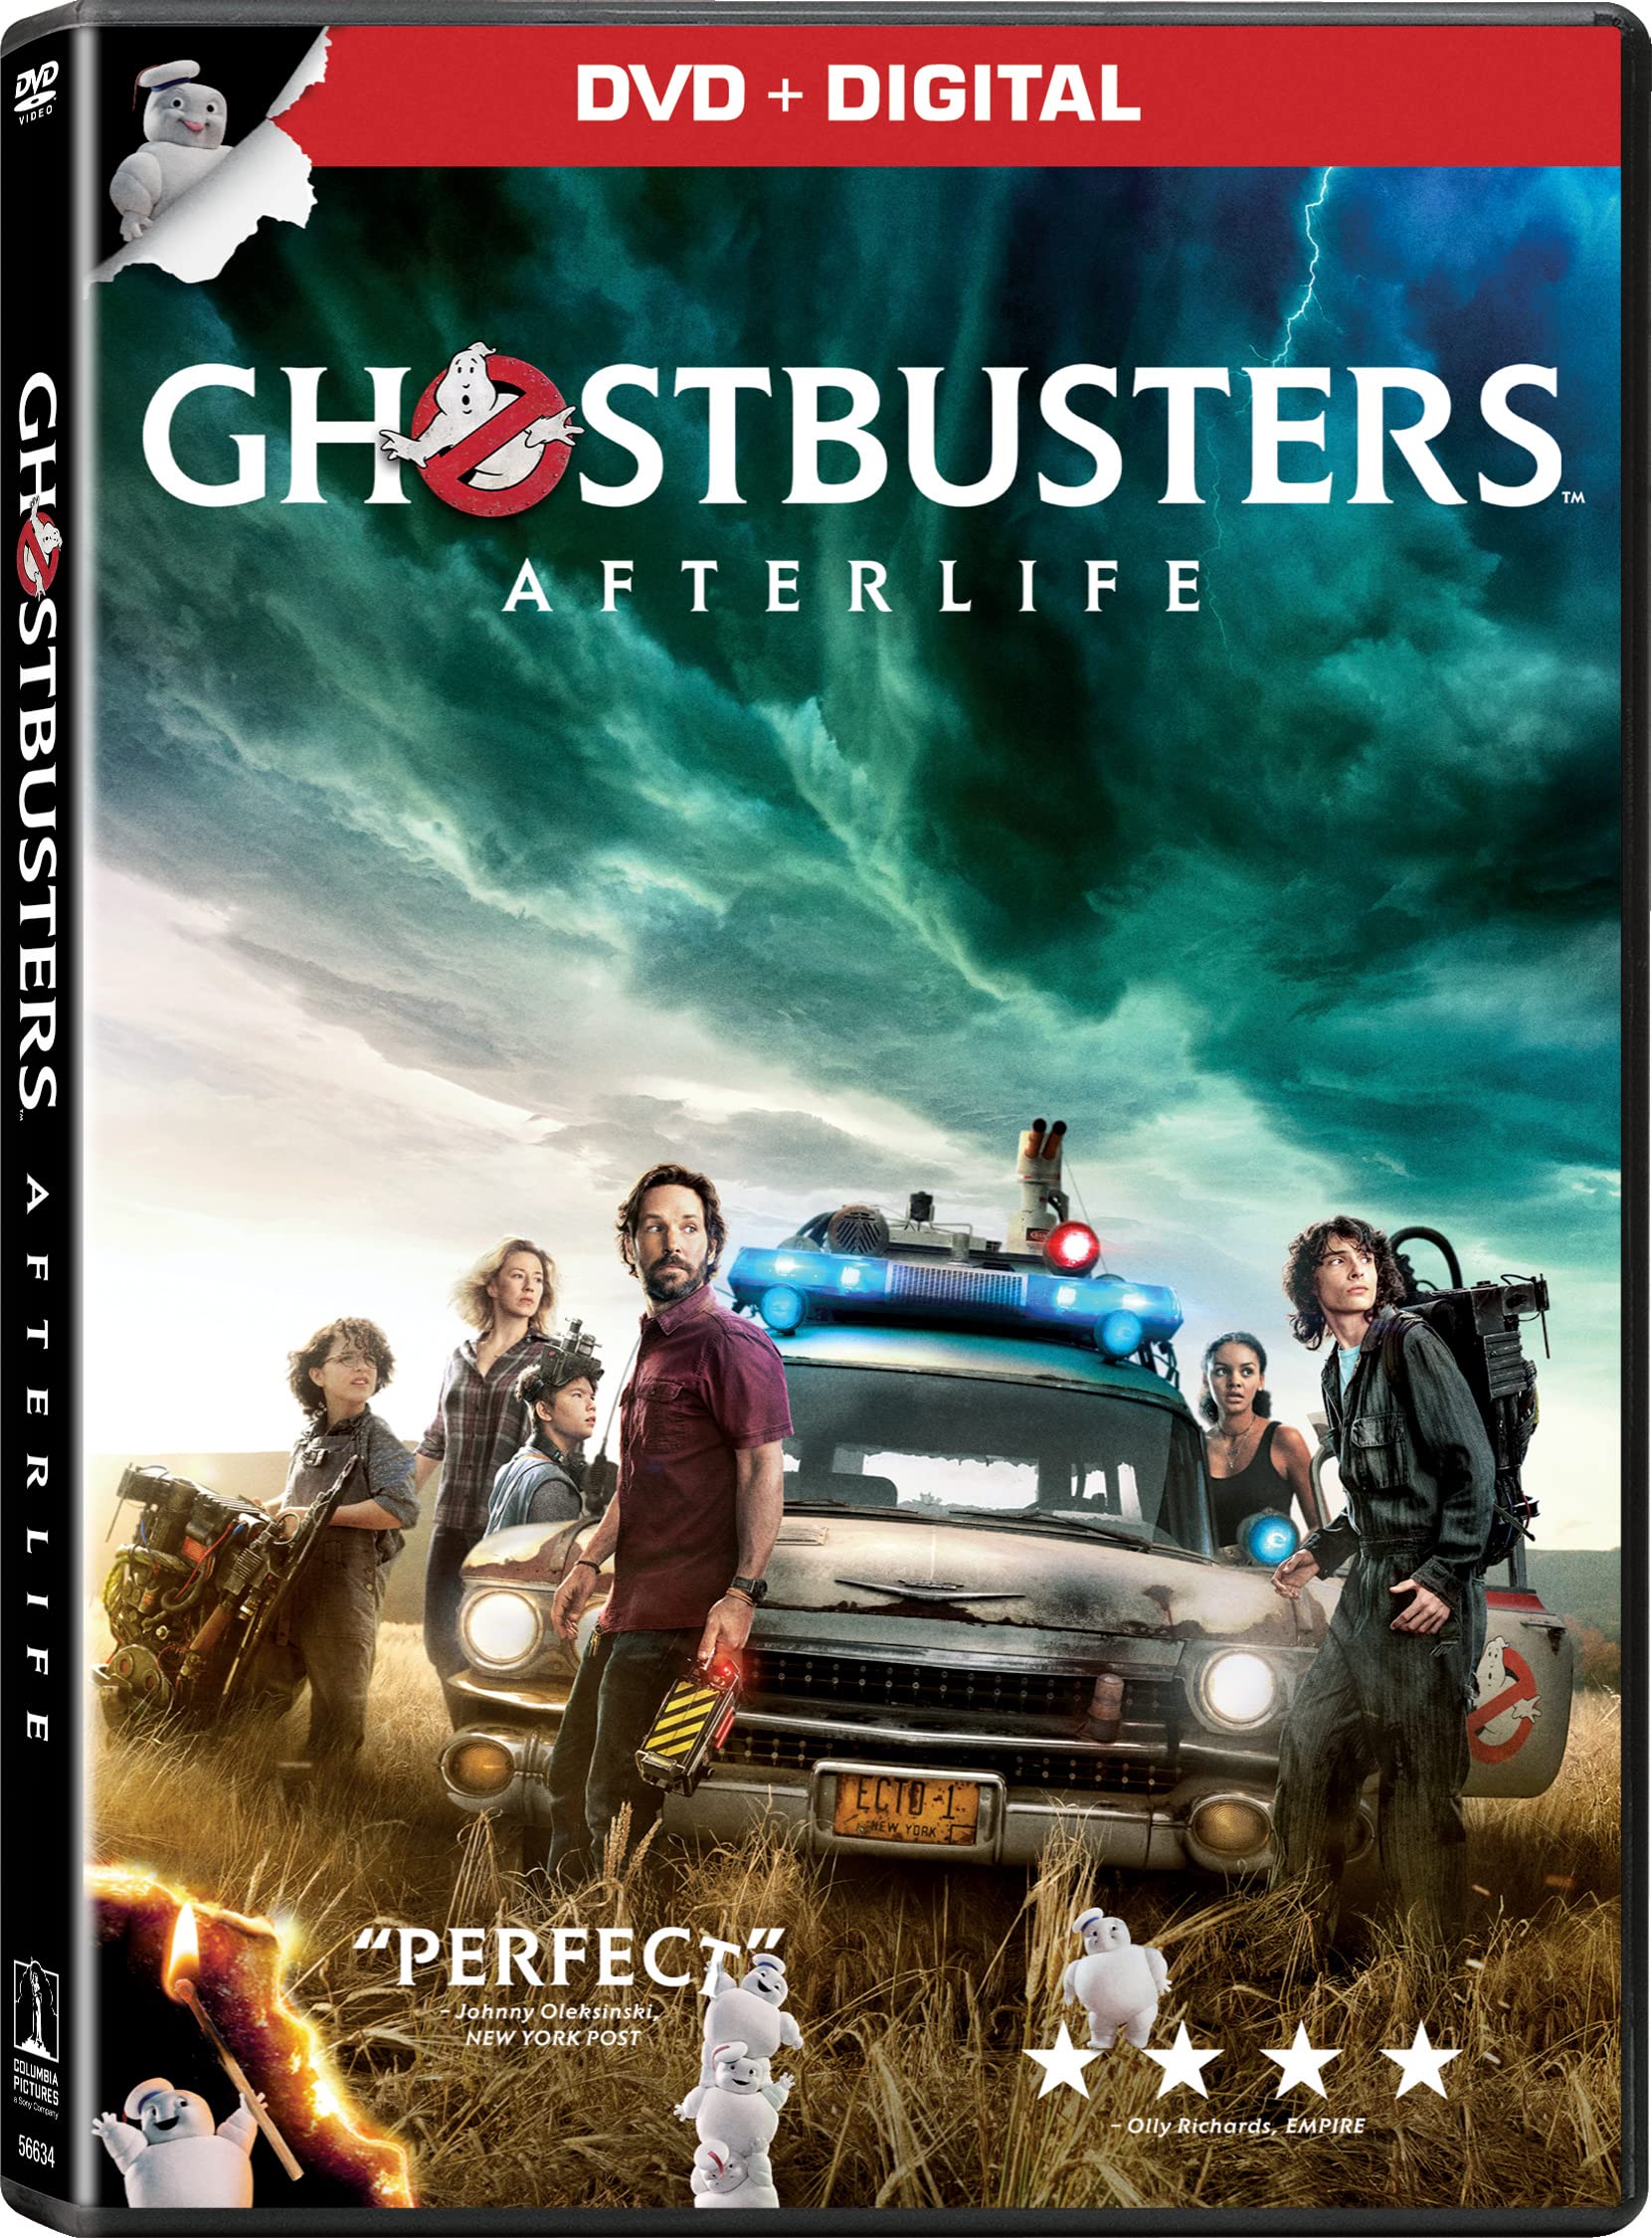 Ghostbusters Afterlife Dvd Release Date February 1 22